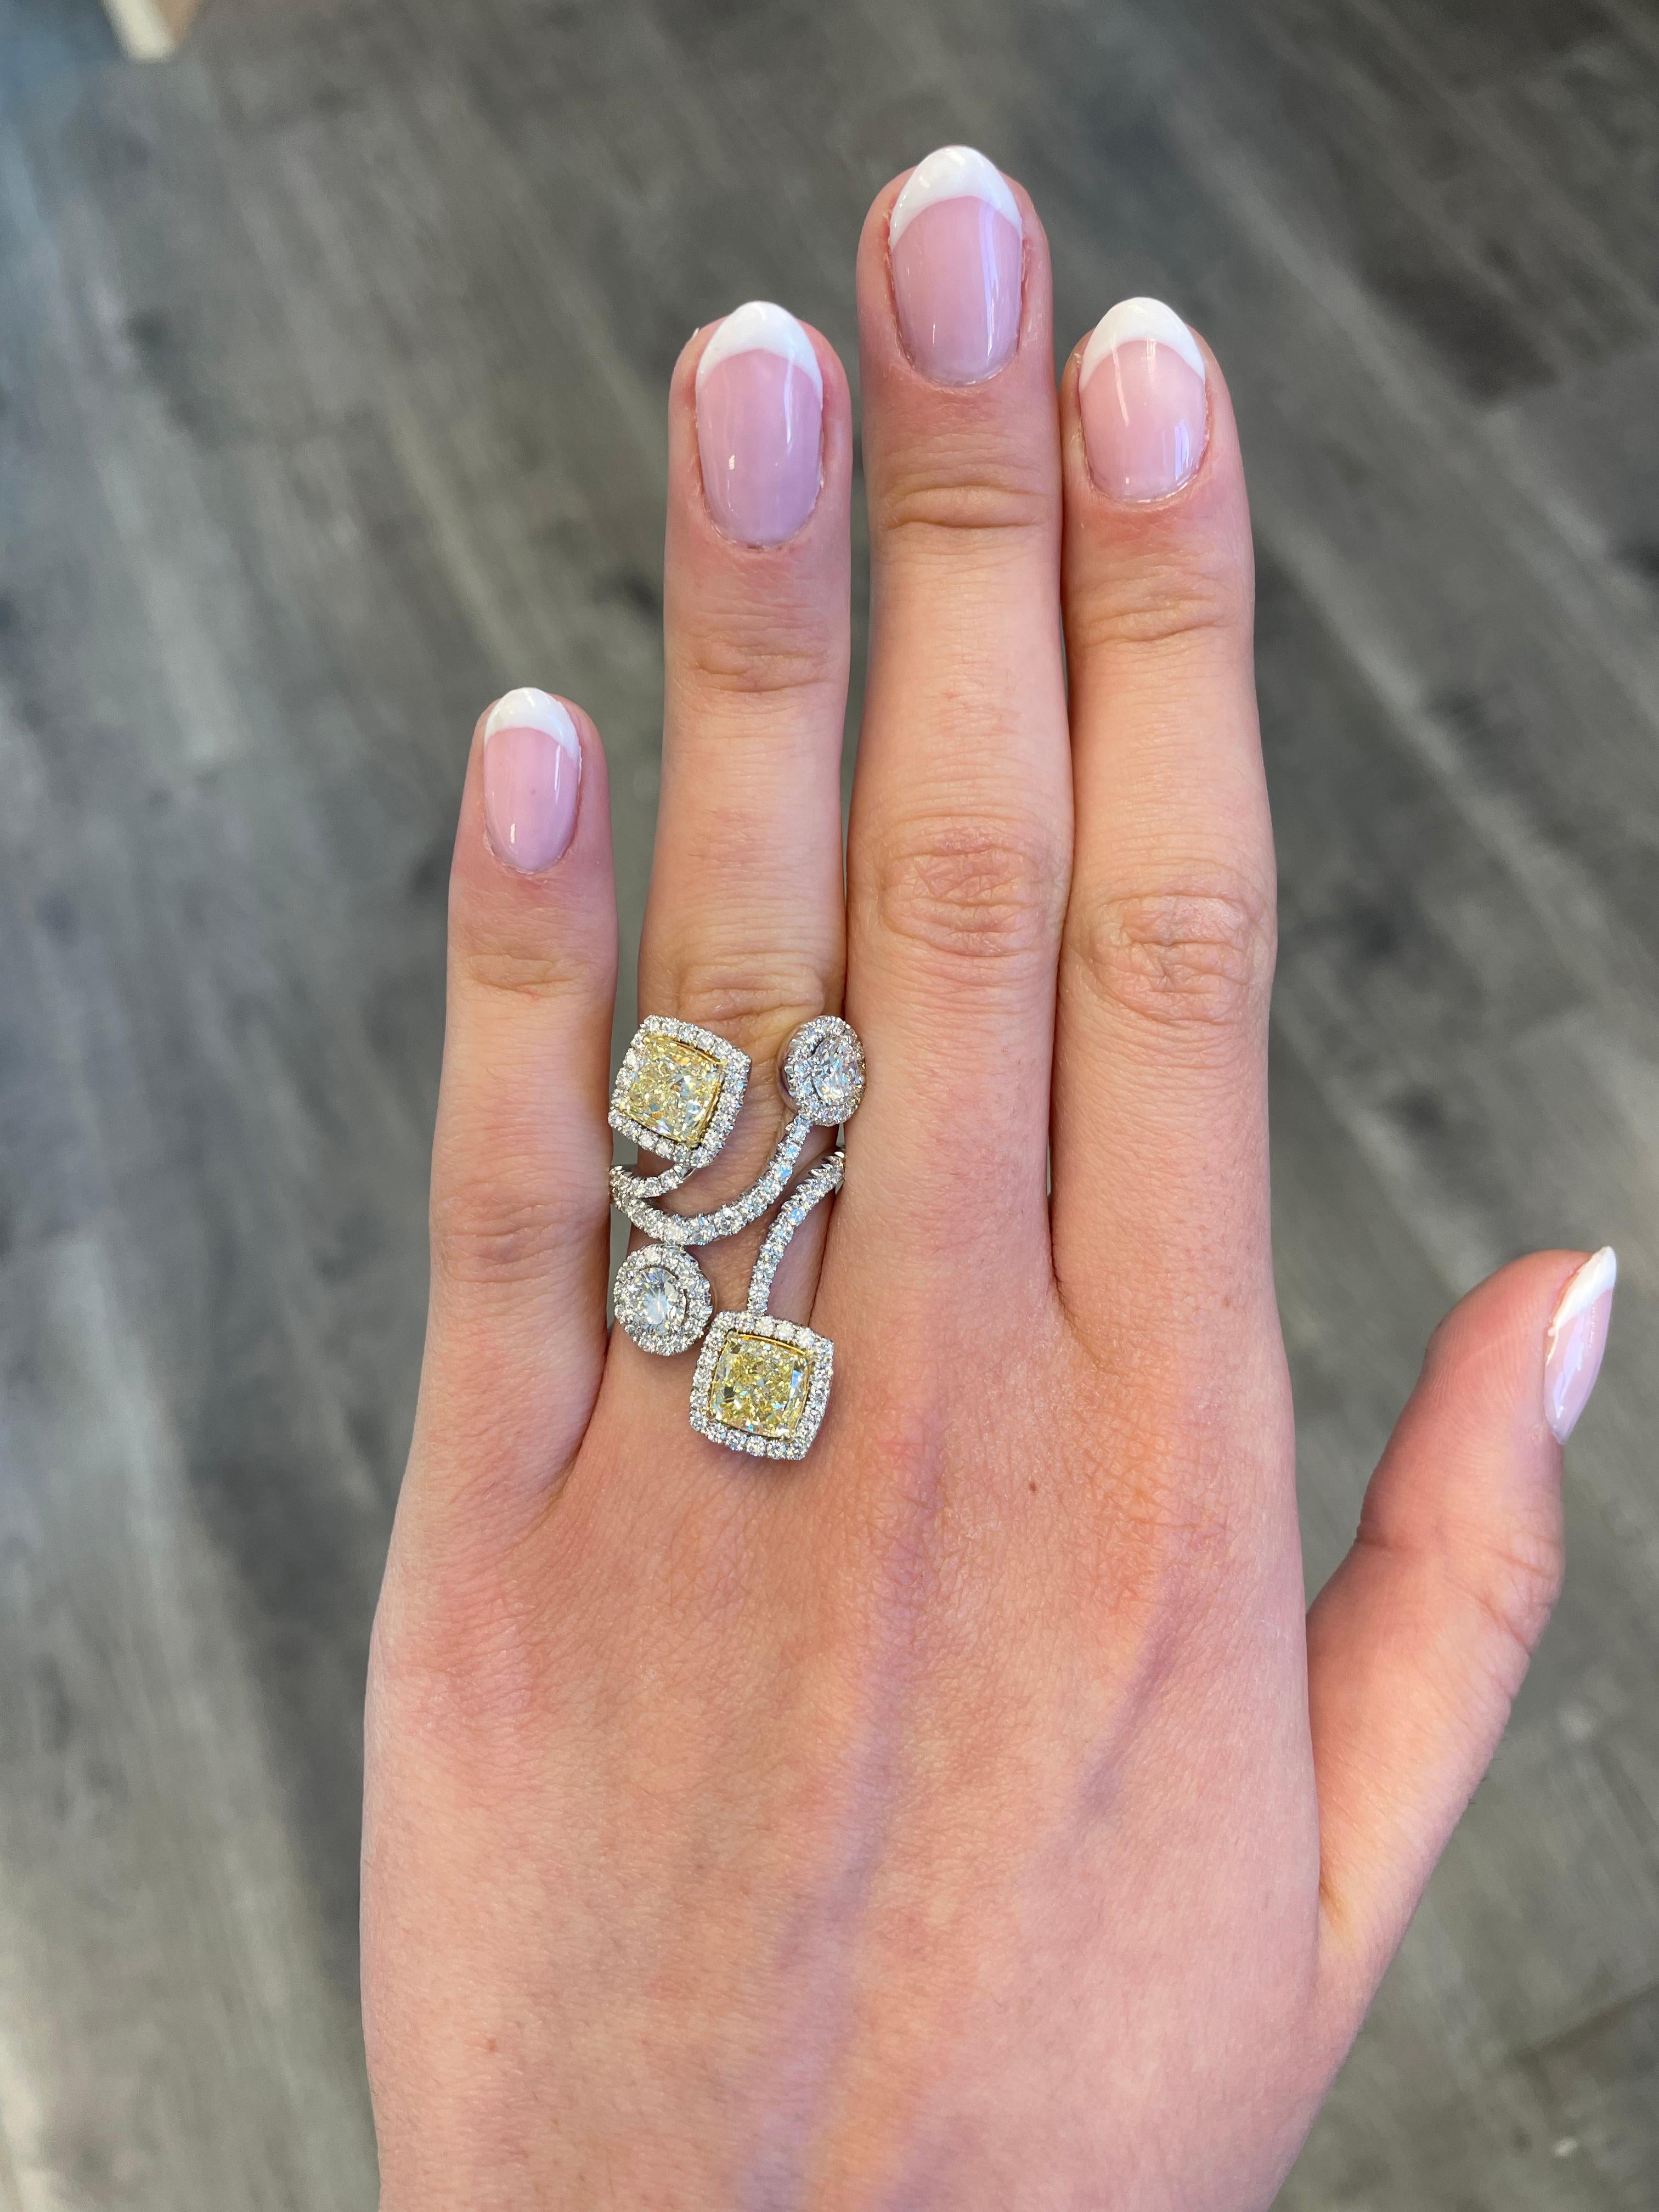 Modern multi yellow YZ diamonds open shank with 2 GIA reports. High jewelry by Alexander Beverly Hills.
6.40 carats total diamond weight.
2 cushion cut diamonds, 3.70 carats total. One stone Y/Z color and the other WX, one stone VVS1 and the other